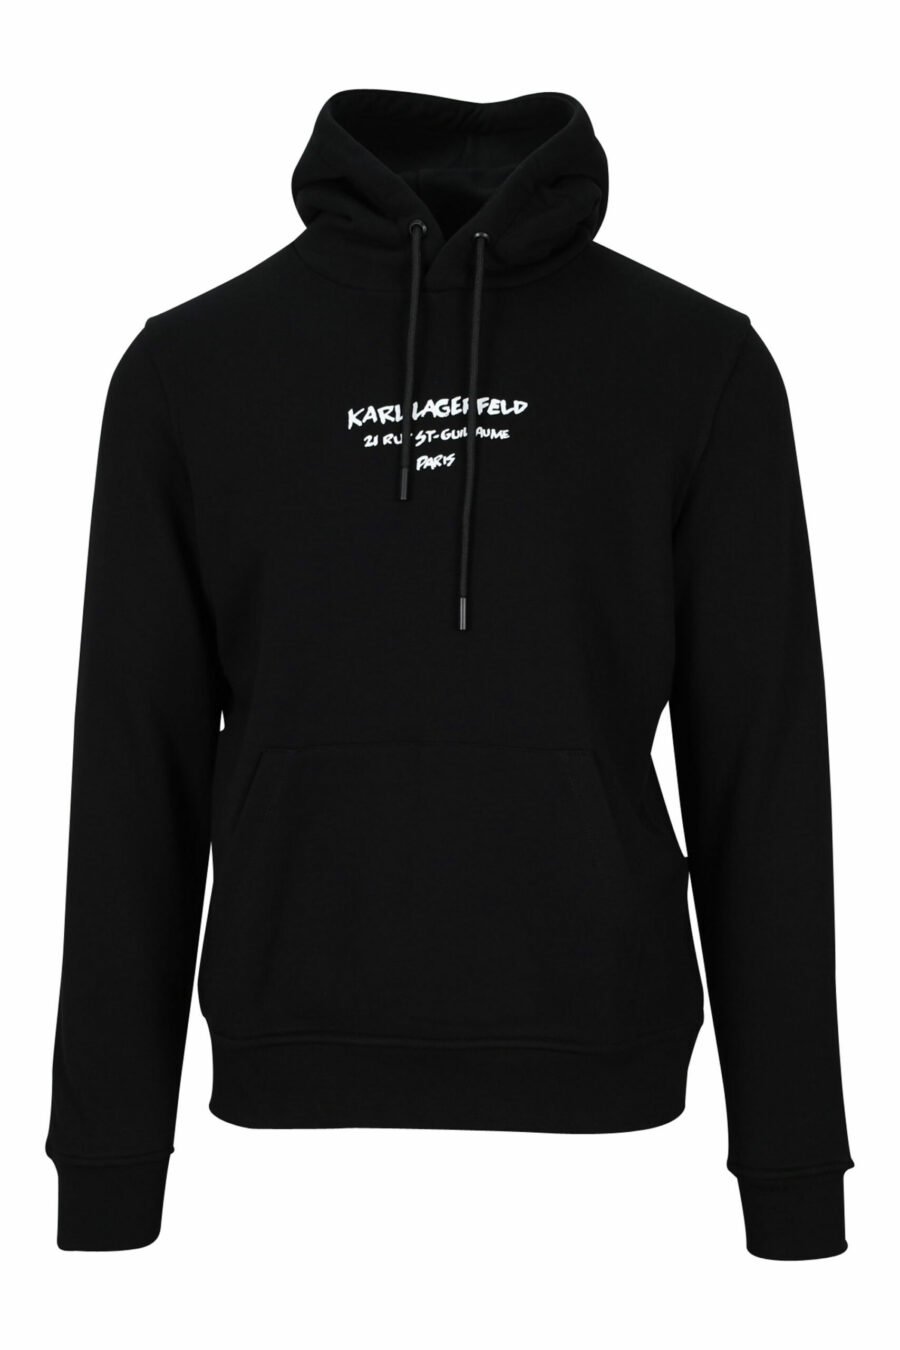 Black hooded sweatshirt with "rue st guillaume" logo - 4062226395977 scaled